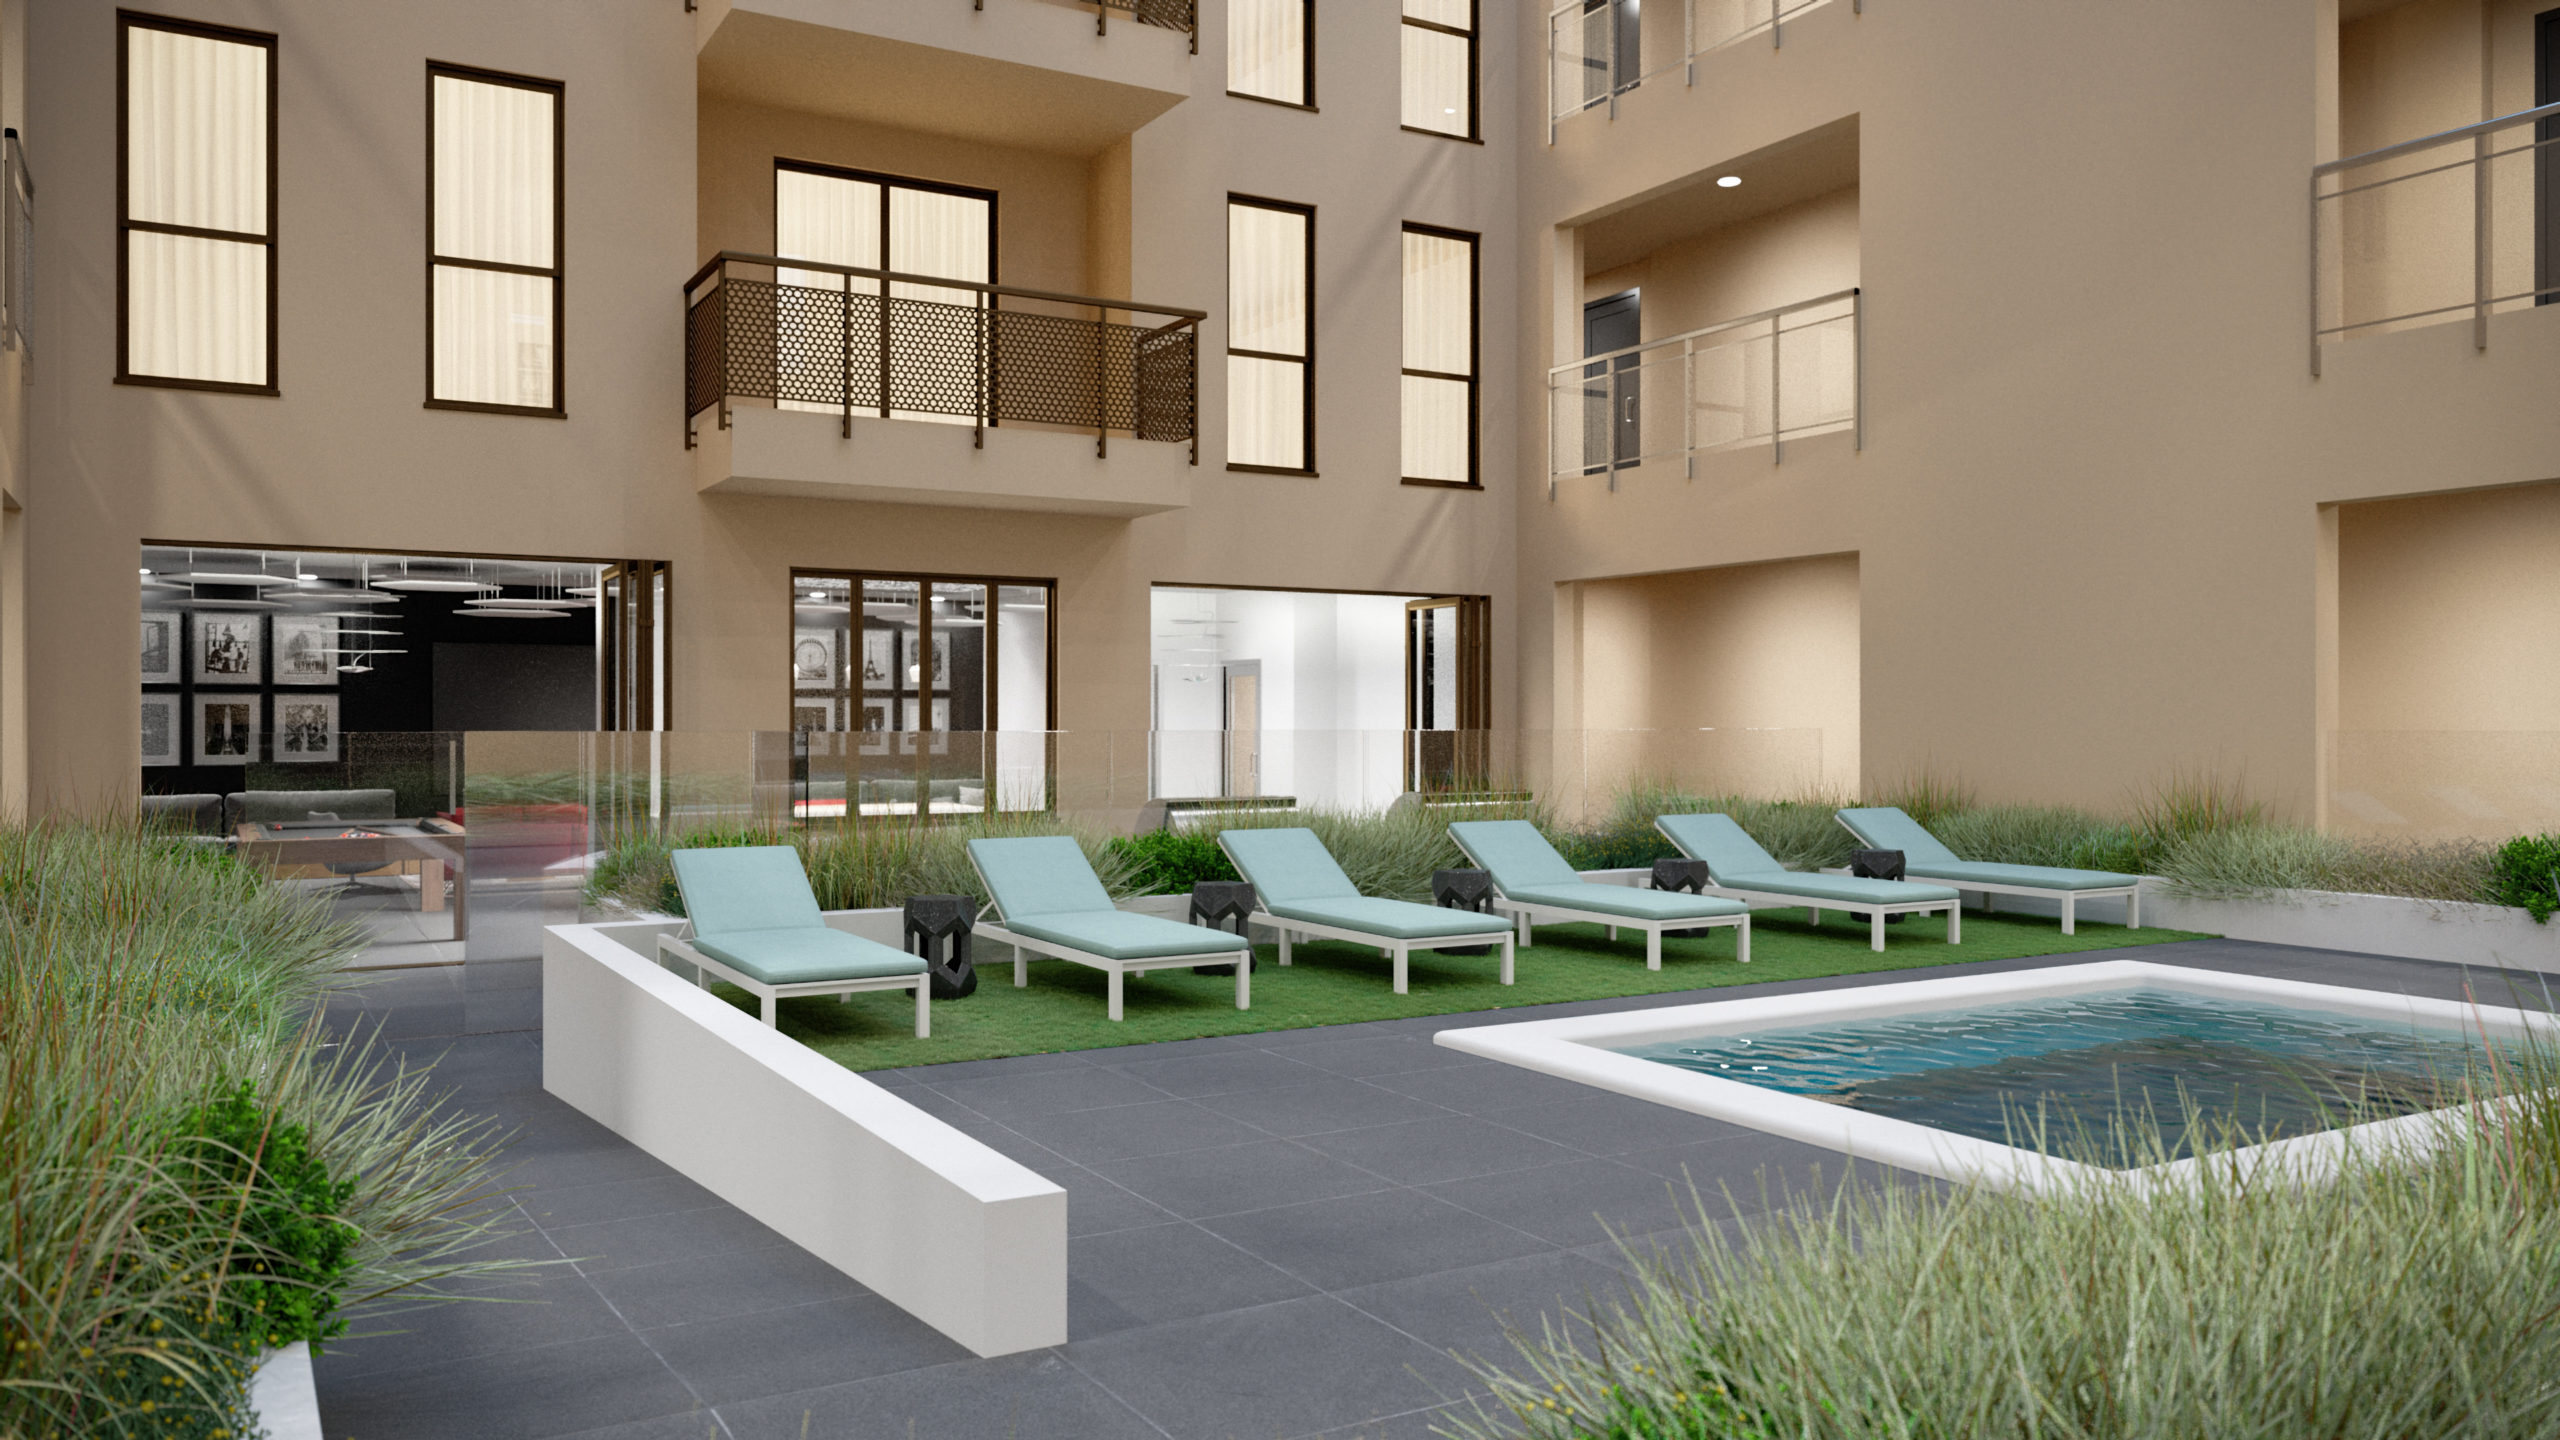 outdoor deck area with spa, gardens, balconies, and sun bathing beds